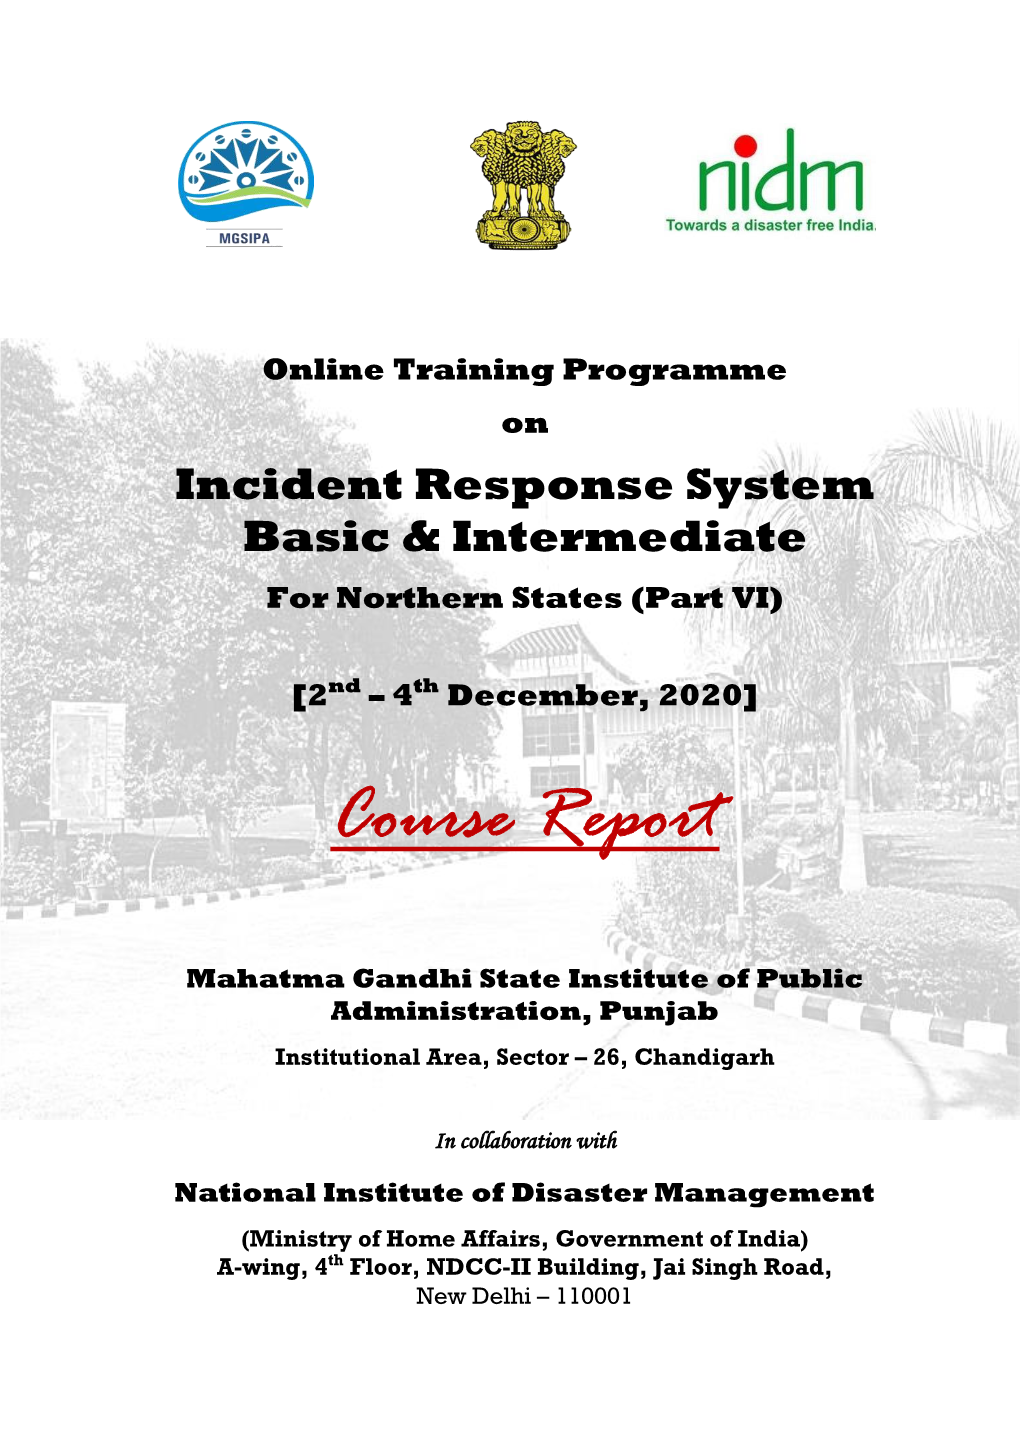 Online Training Programme on Incident Response System Basic & Intermediate for Northern States (Part VI)